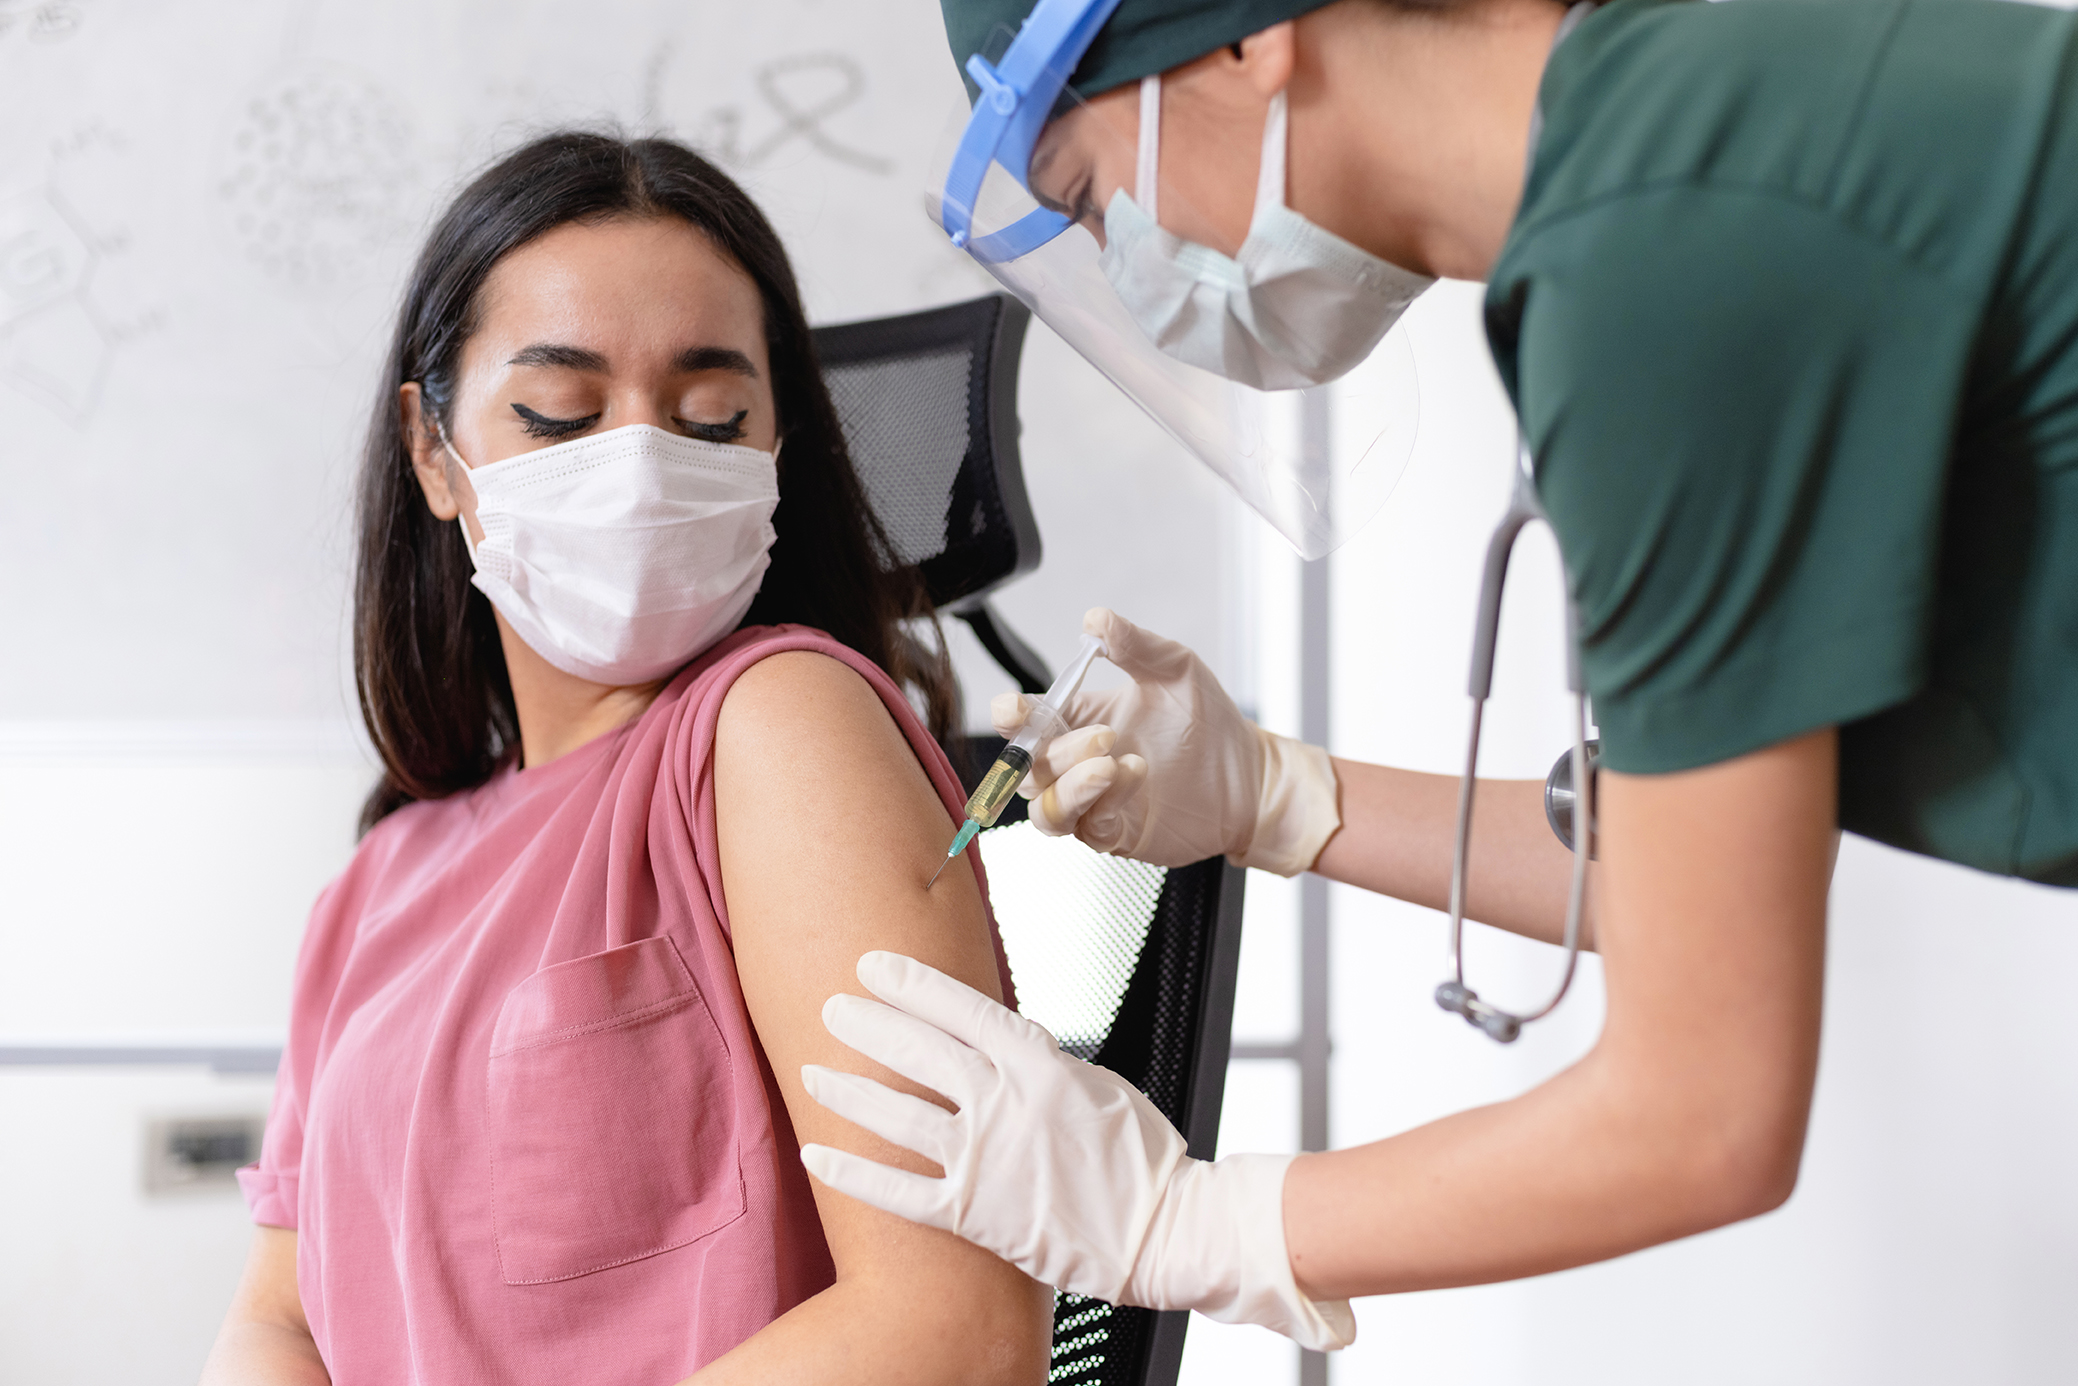 Female Doctor Or Nurse Giving COVID-19 Vaccination Shot To Her Patient At The Clinic